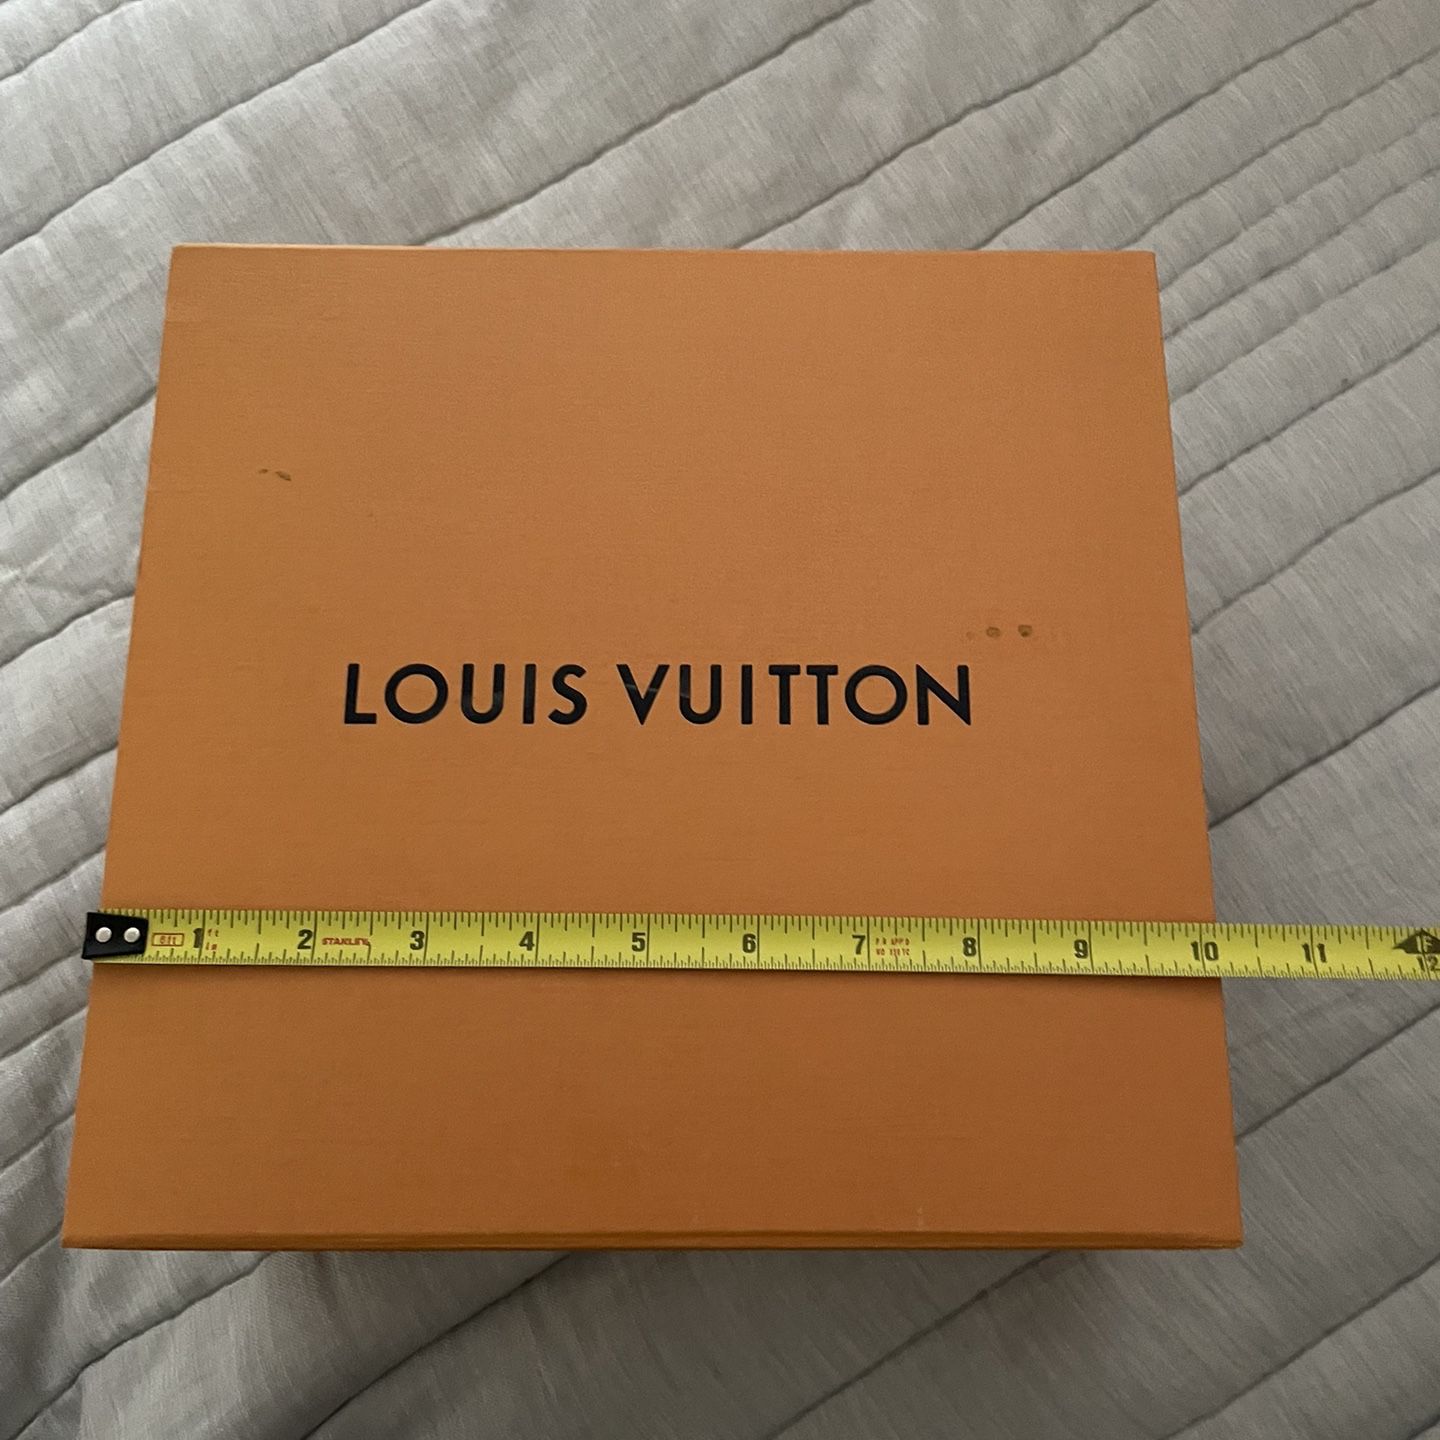 Louis Vuitton shoe box With Magnetic Flap for Sale in Oakland, CA - OfferUp